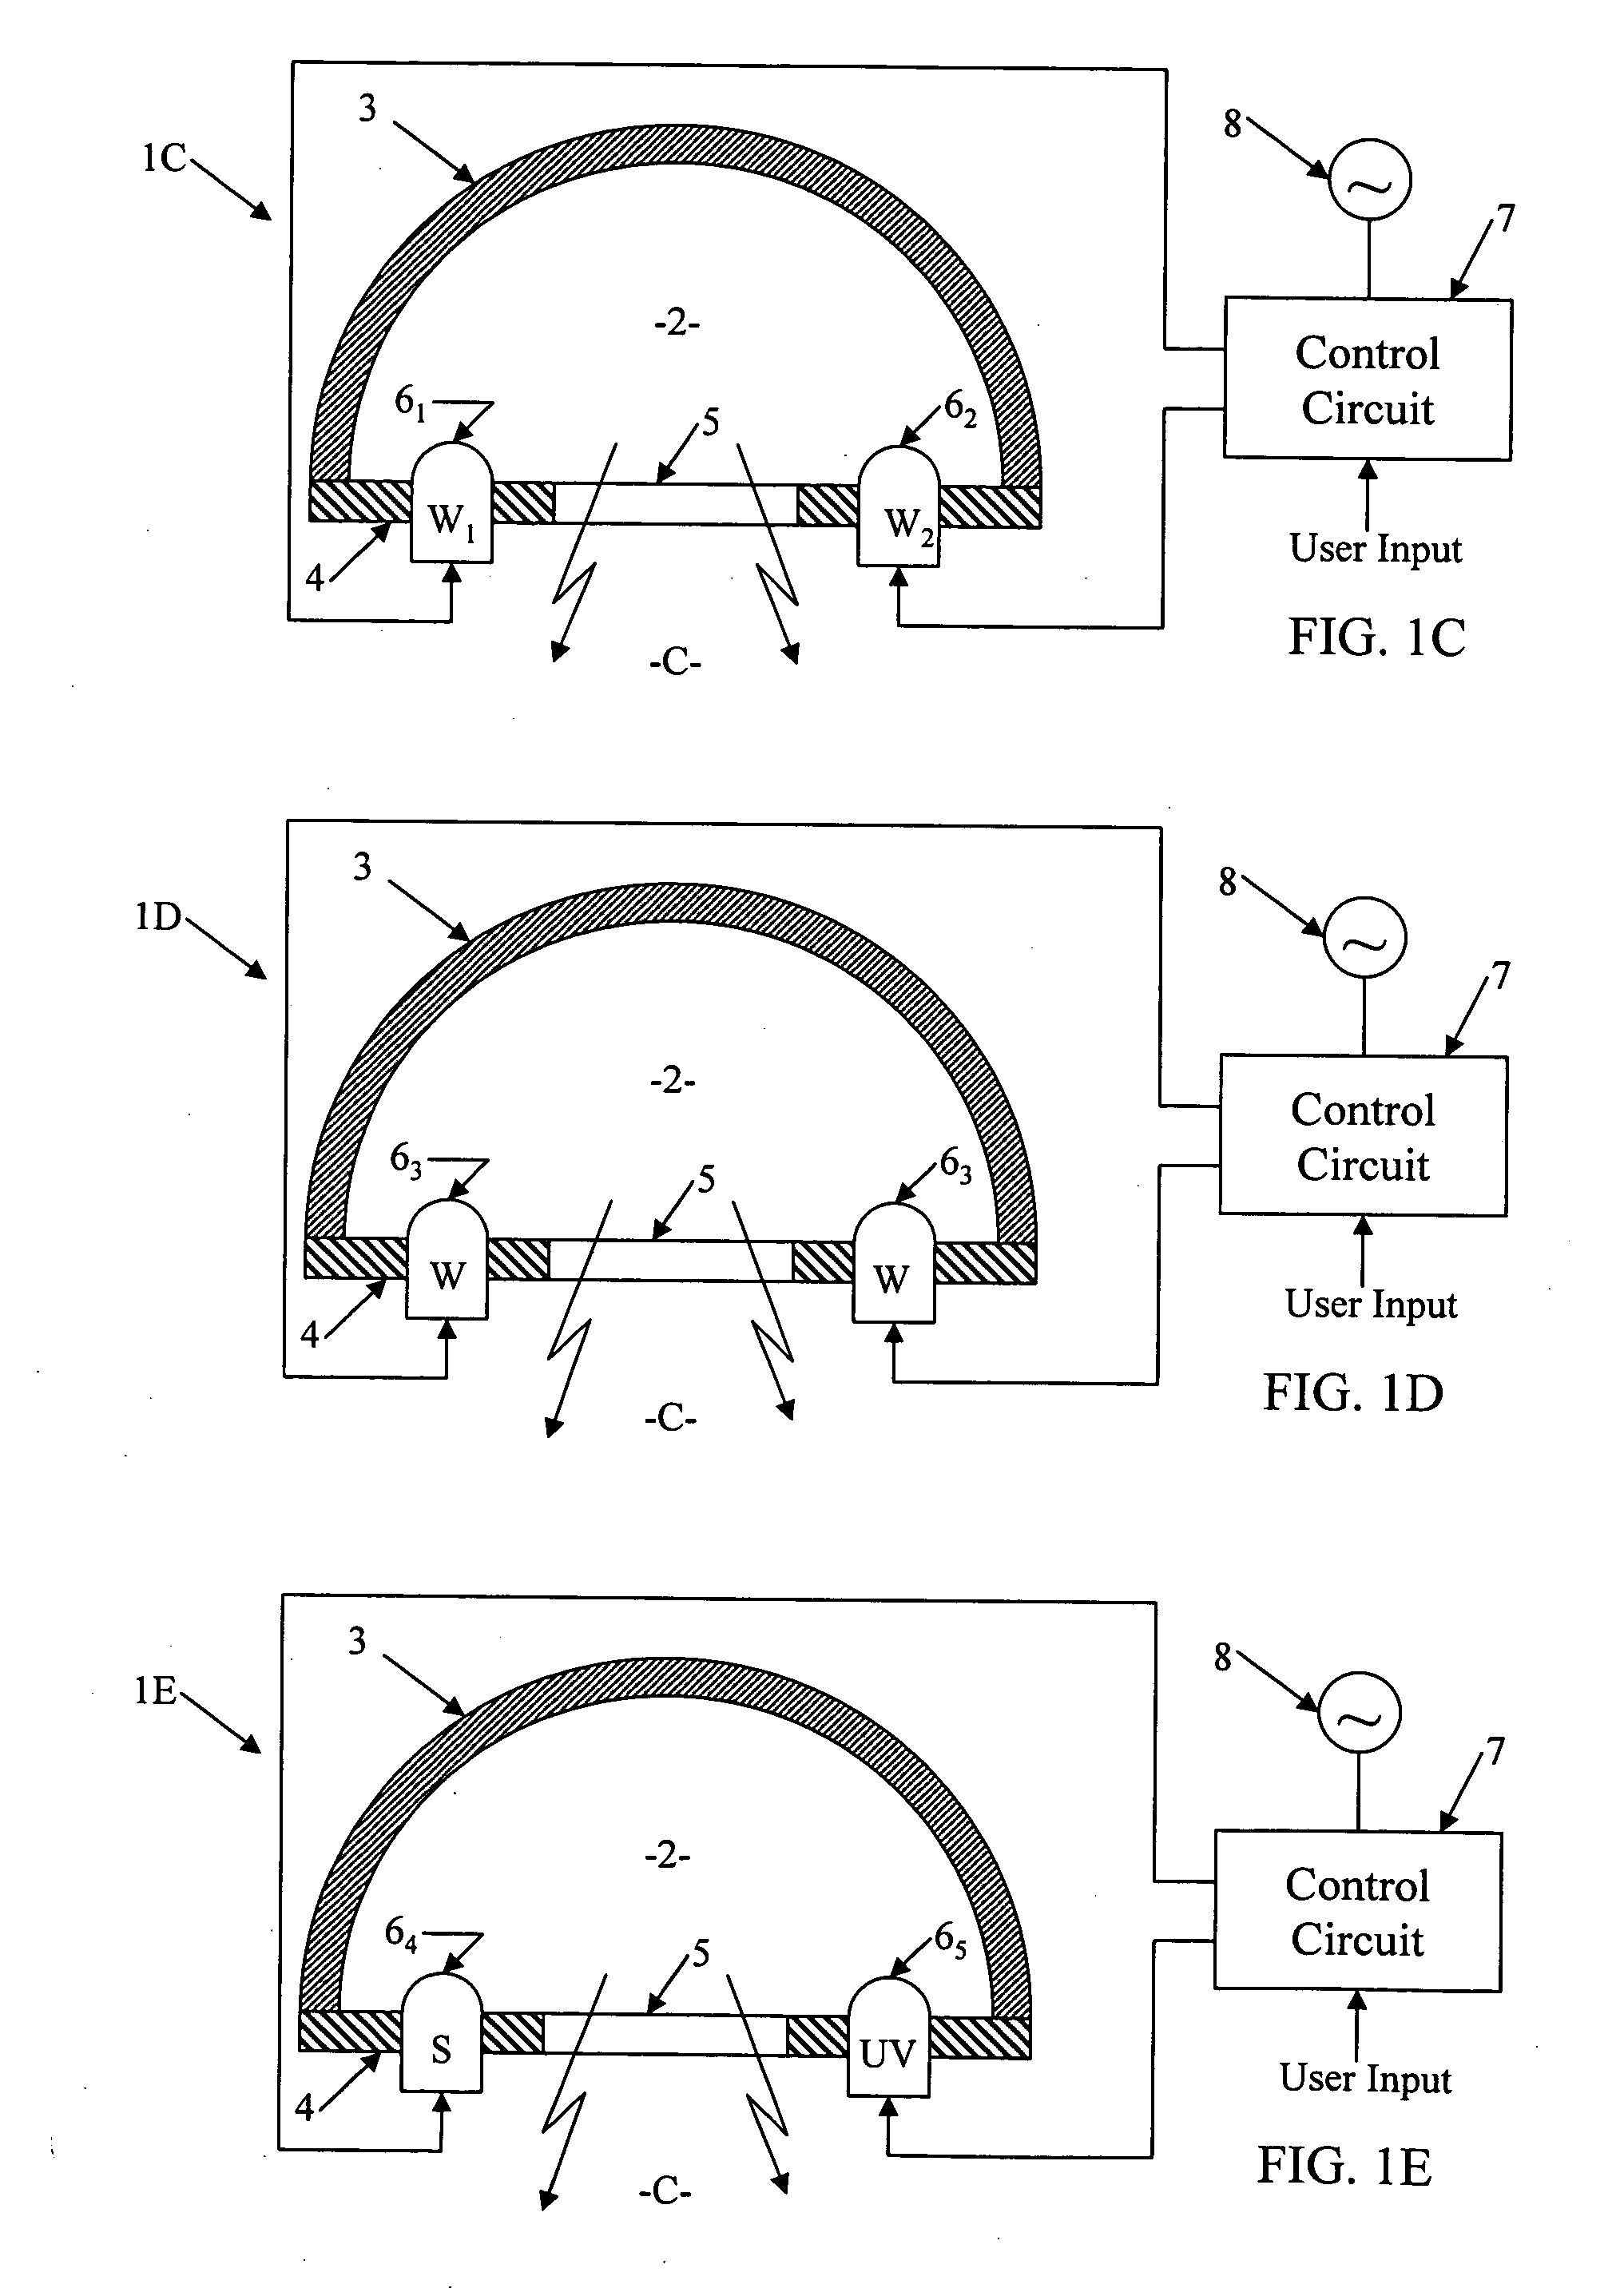 Conversion of solid state source output to virtual source